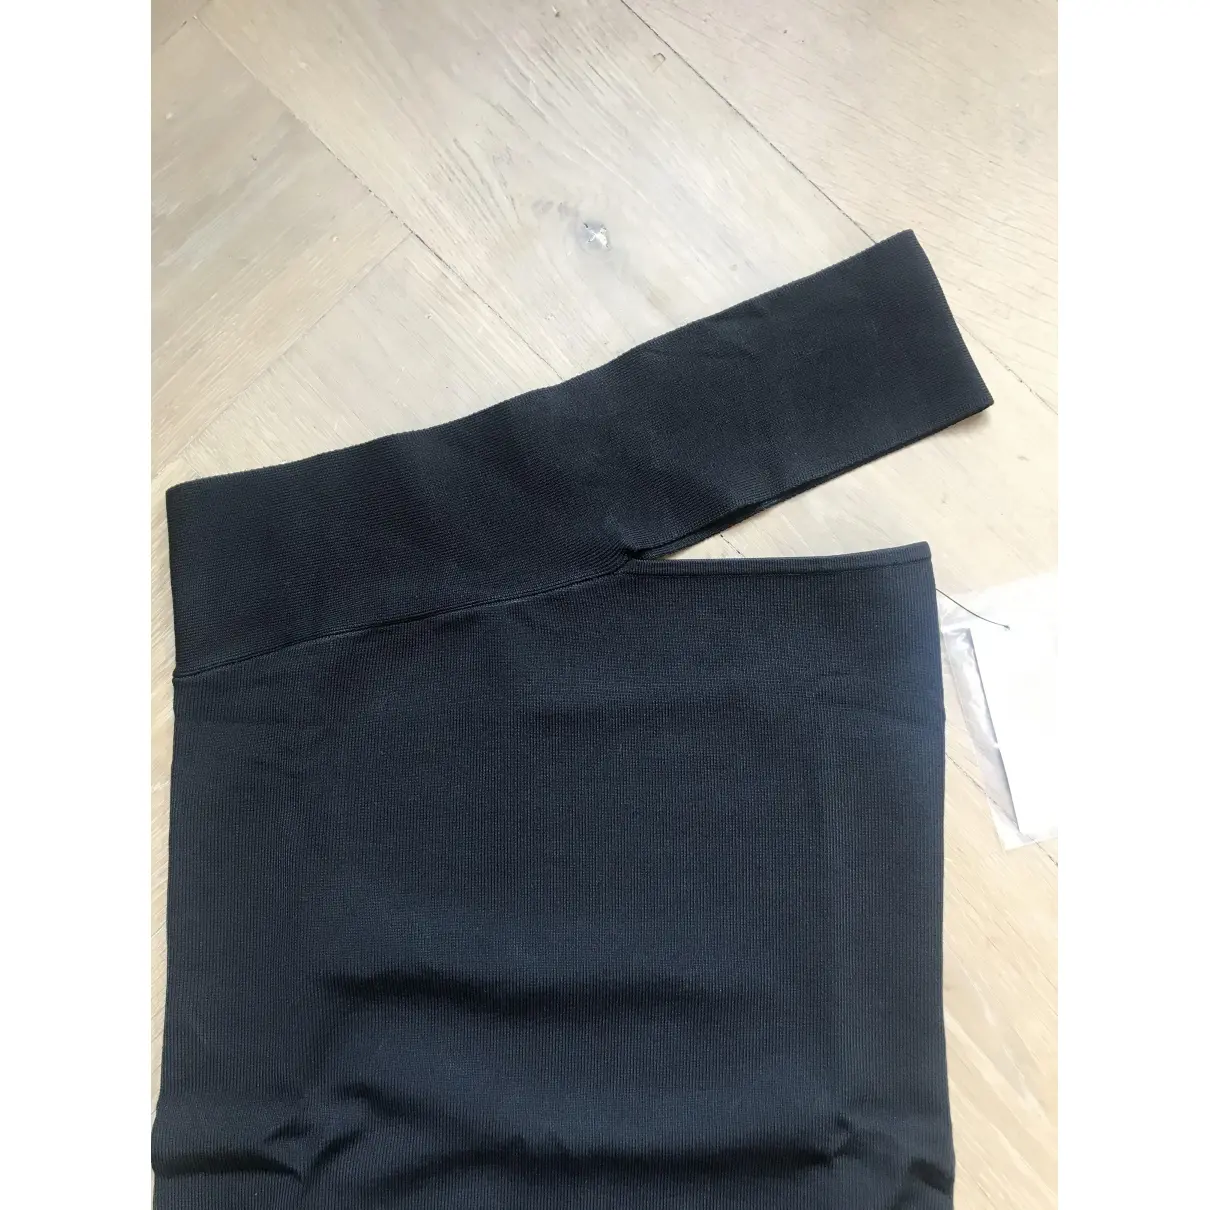 Alix The Label Black Synthetic Top for sale